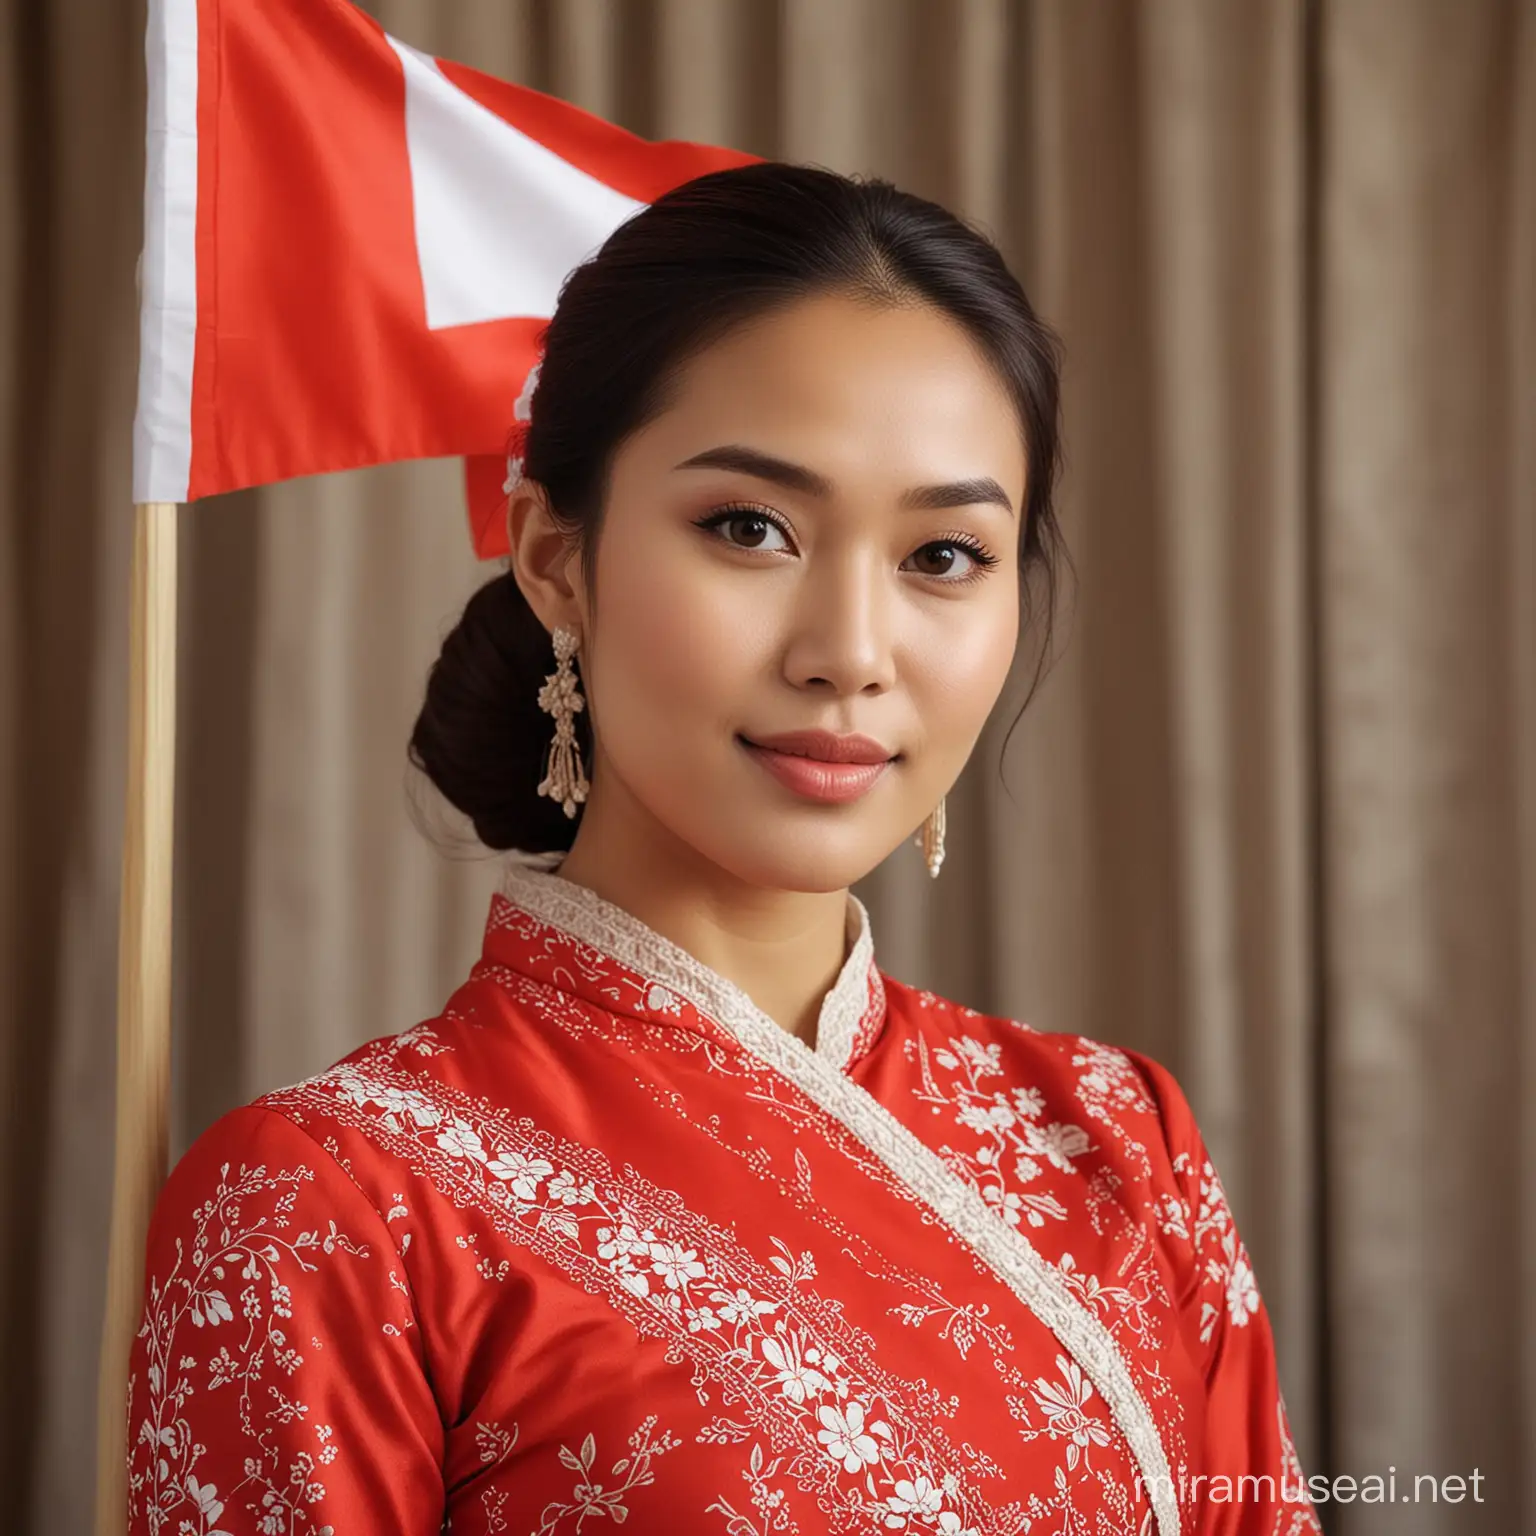 Indonesian Woman in Red Kebaya with National Flag Background